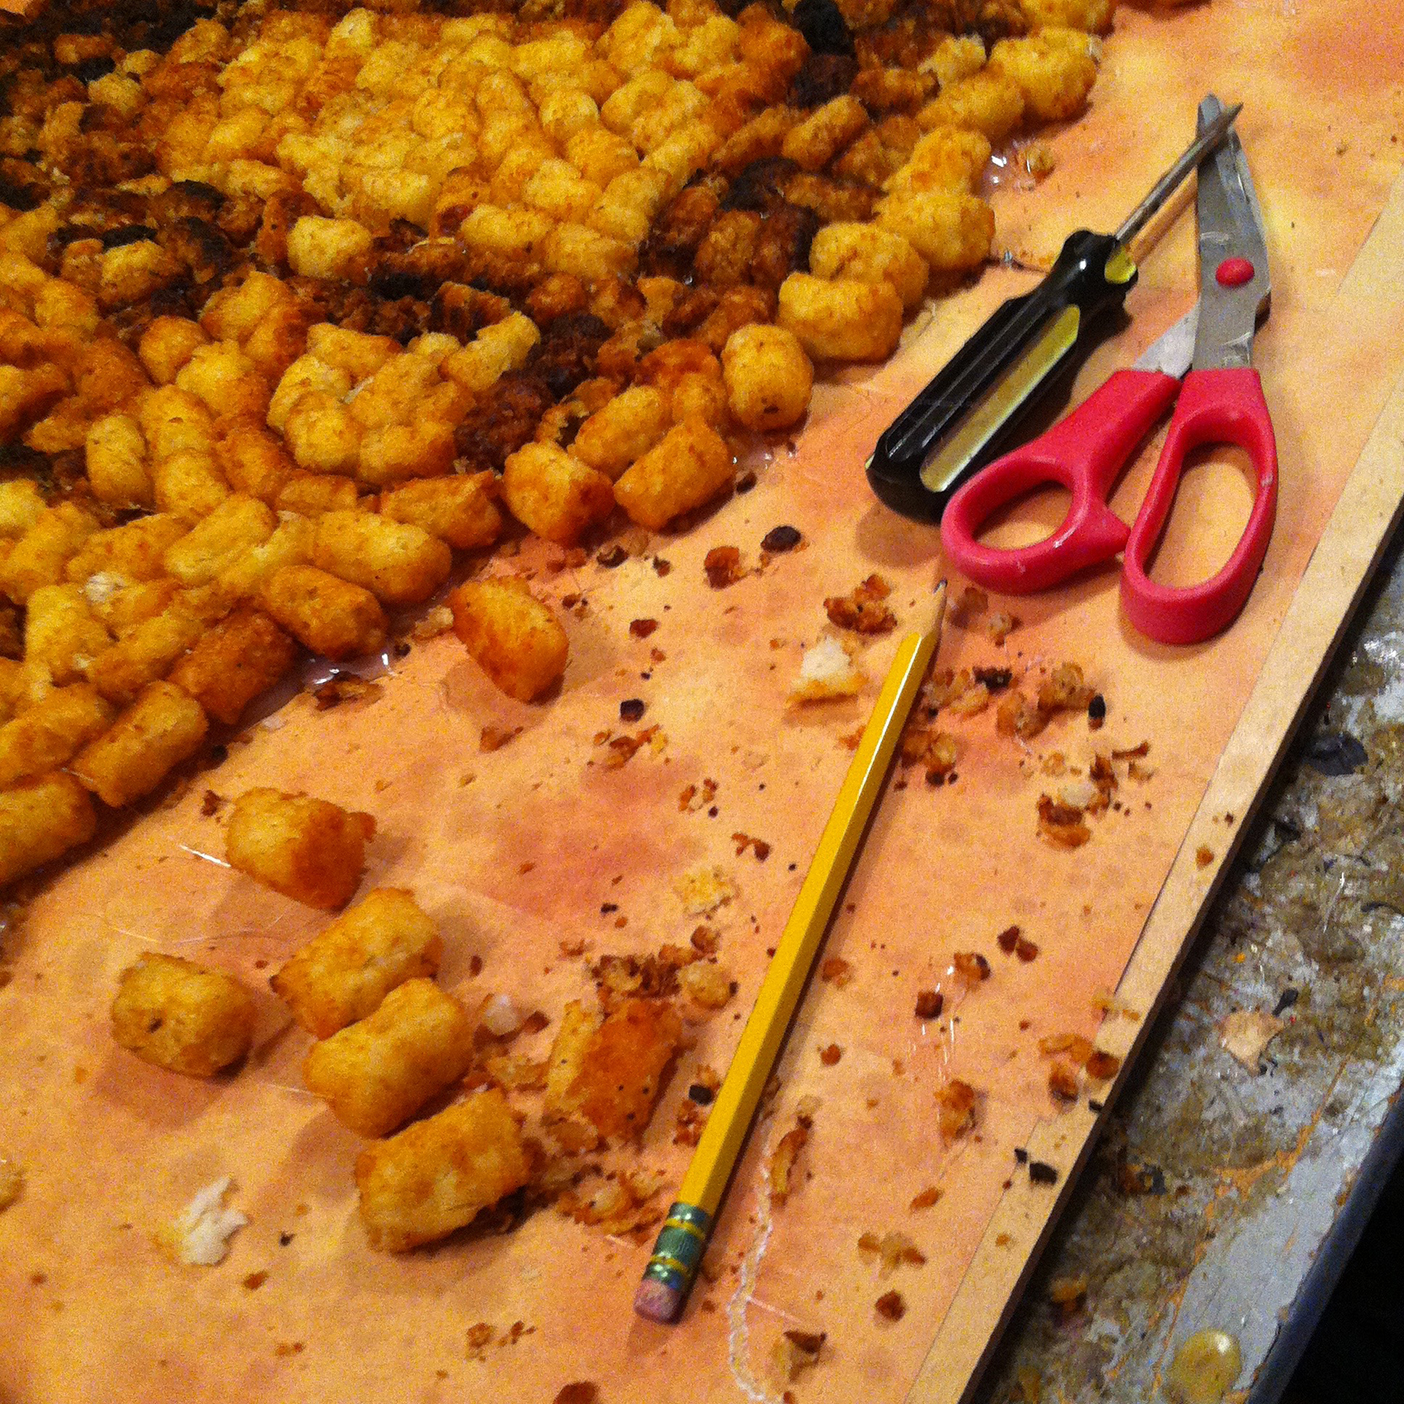 Photo from the process of making the cover art showing Napoleon Dynamite made out of tater tots